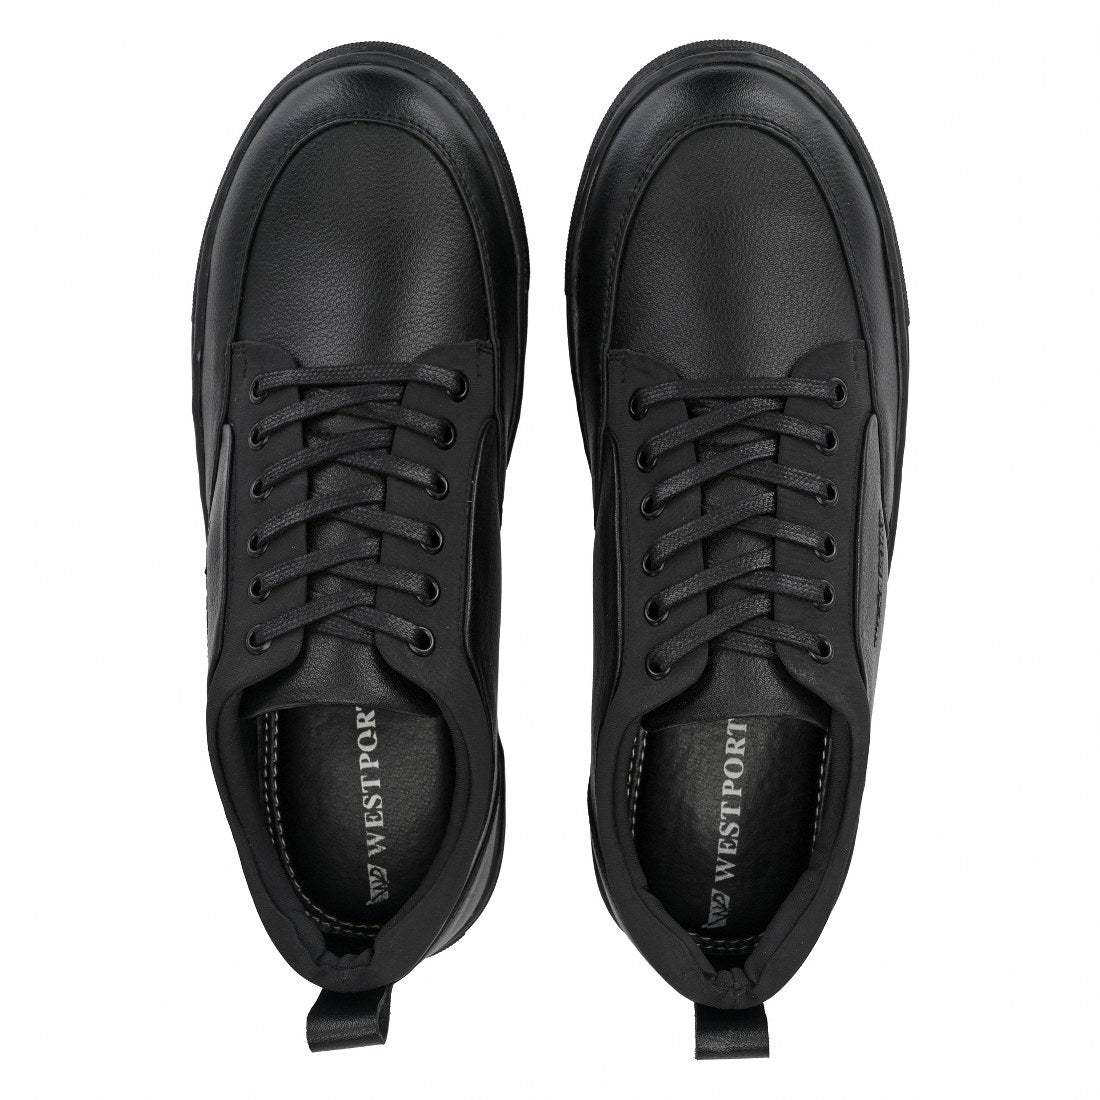 FUN-53 MEN NON-LEATHER BLACK CASUAL LACE UP SNEAKERS